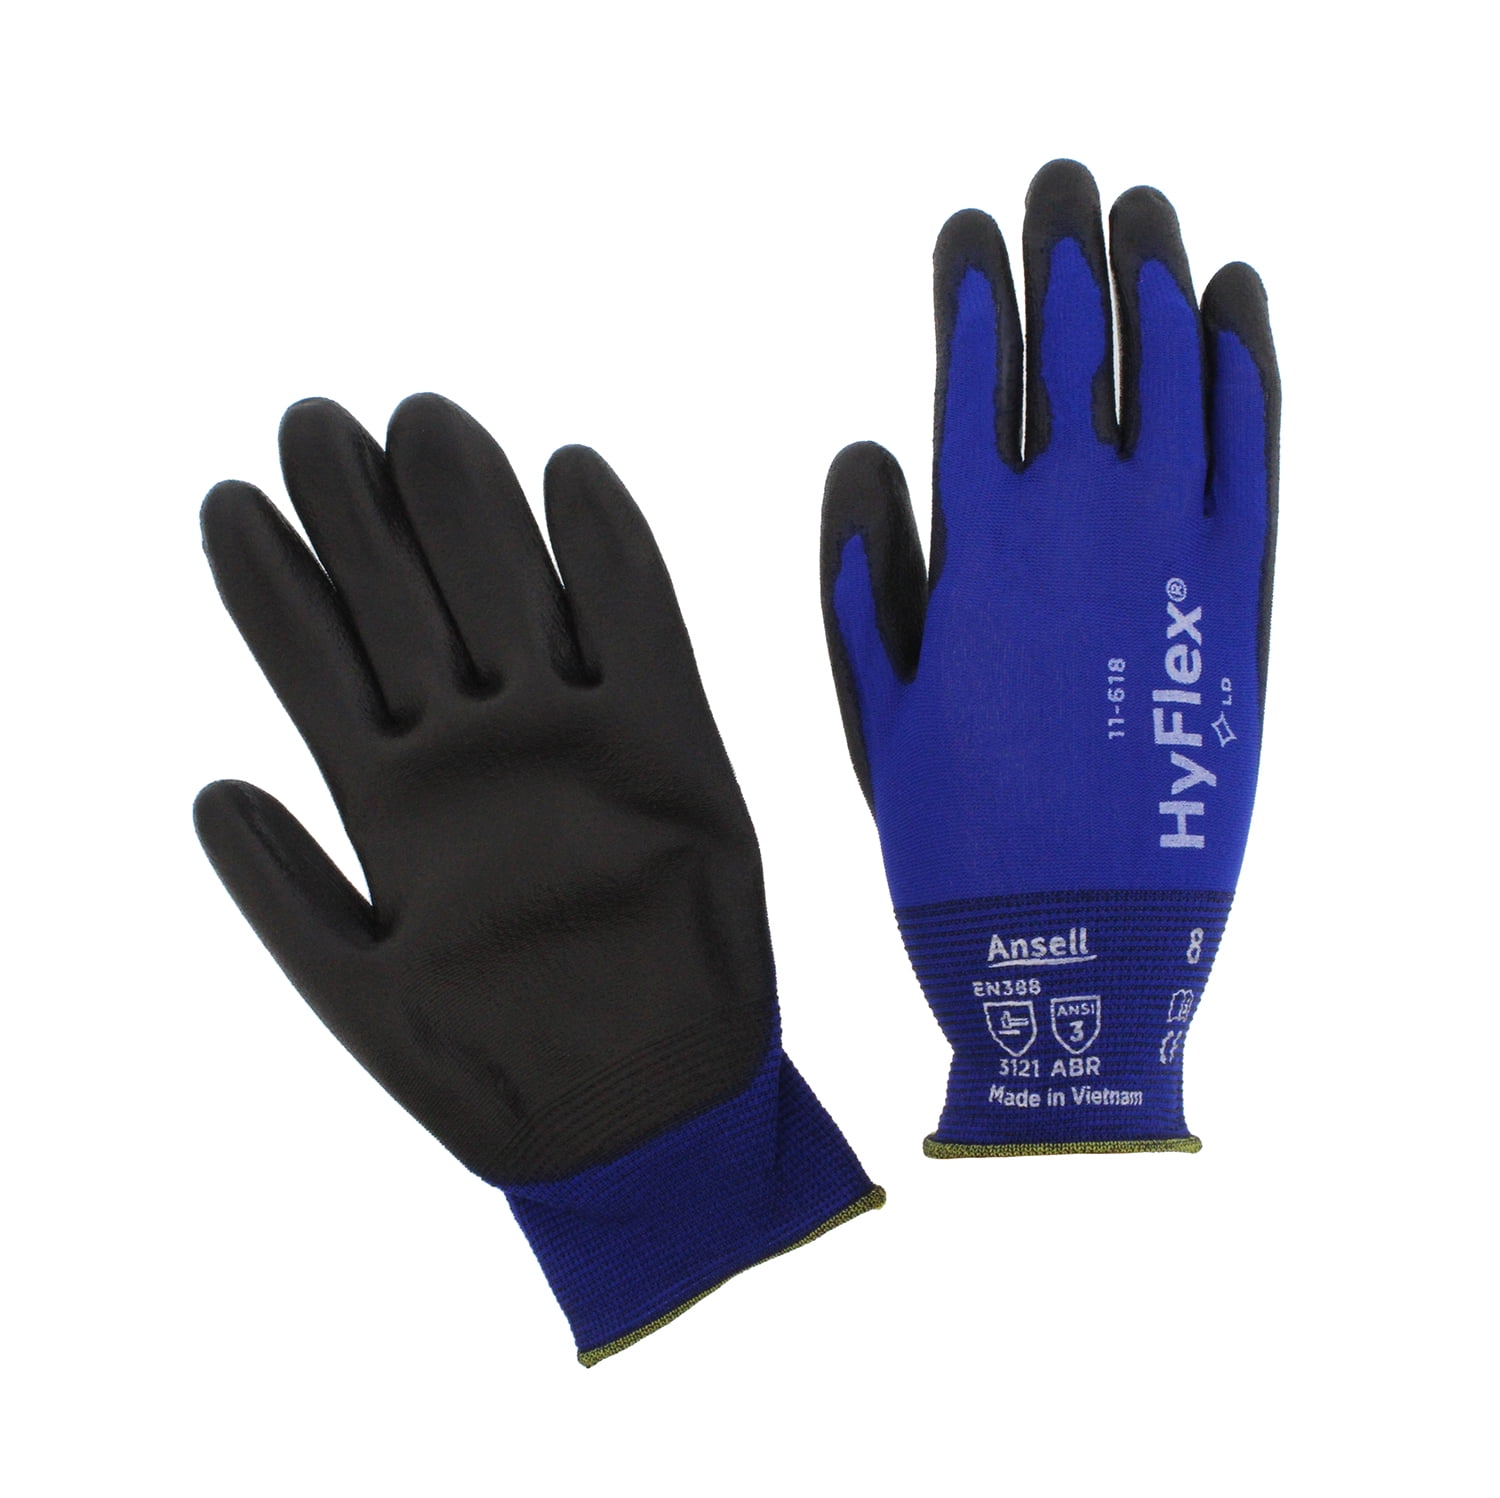 Ansell HyFlex 11-618 Nylon Light Duty Multi-Purpose Glove with Knitwrist Abrasion/Cut Resistant Blue Pack of 12 Pair Size 8